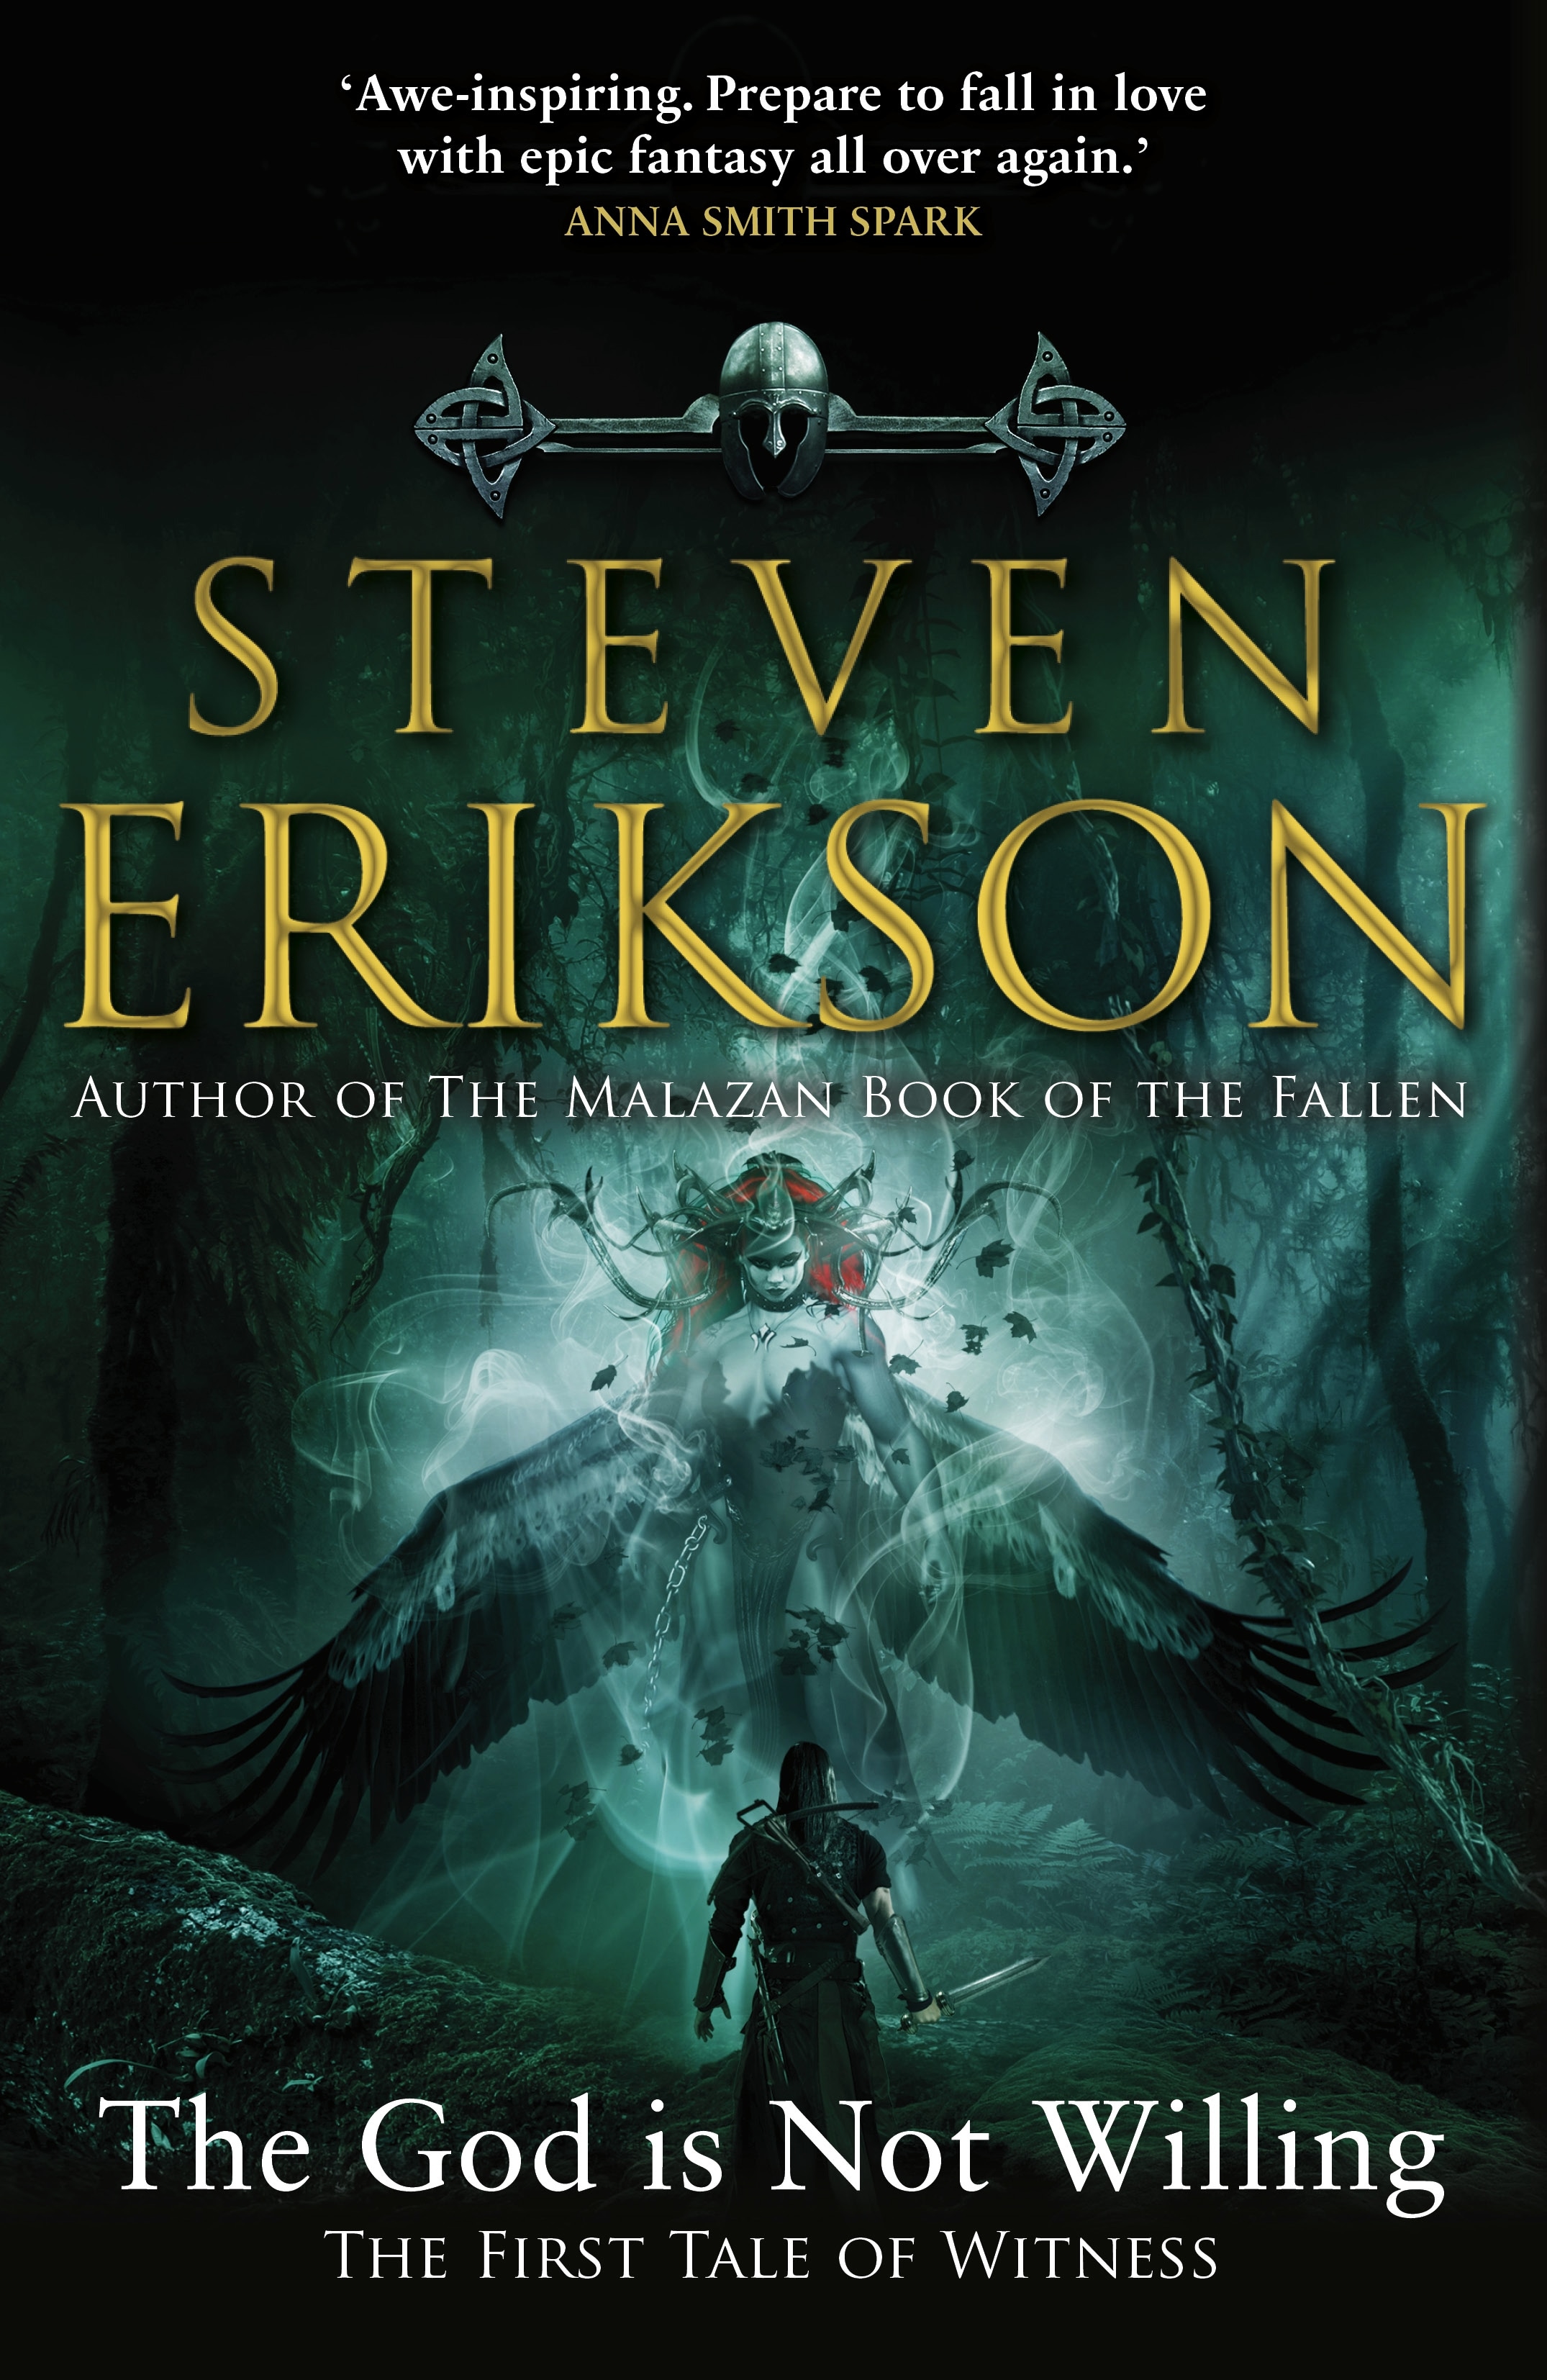 Book “The God is Not Willing” by Steven Erikson — July 1, 2021